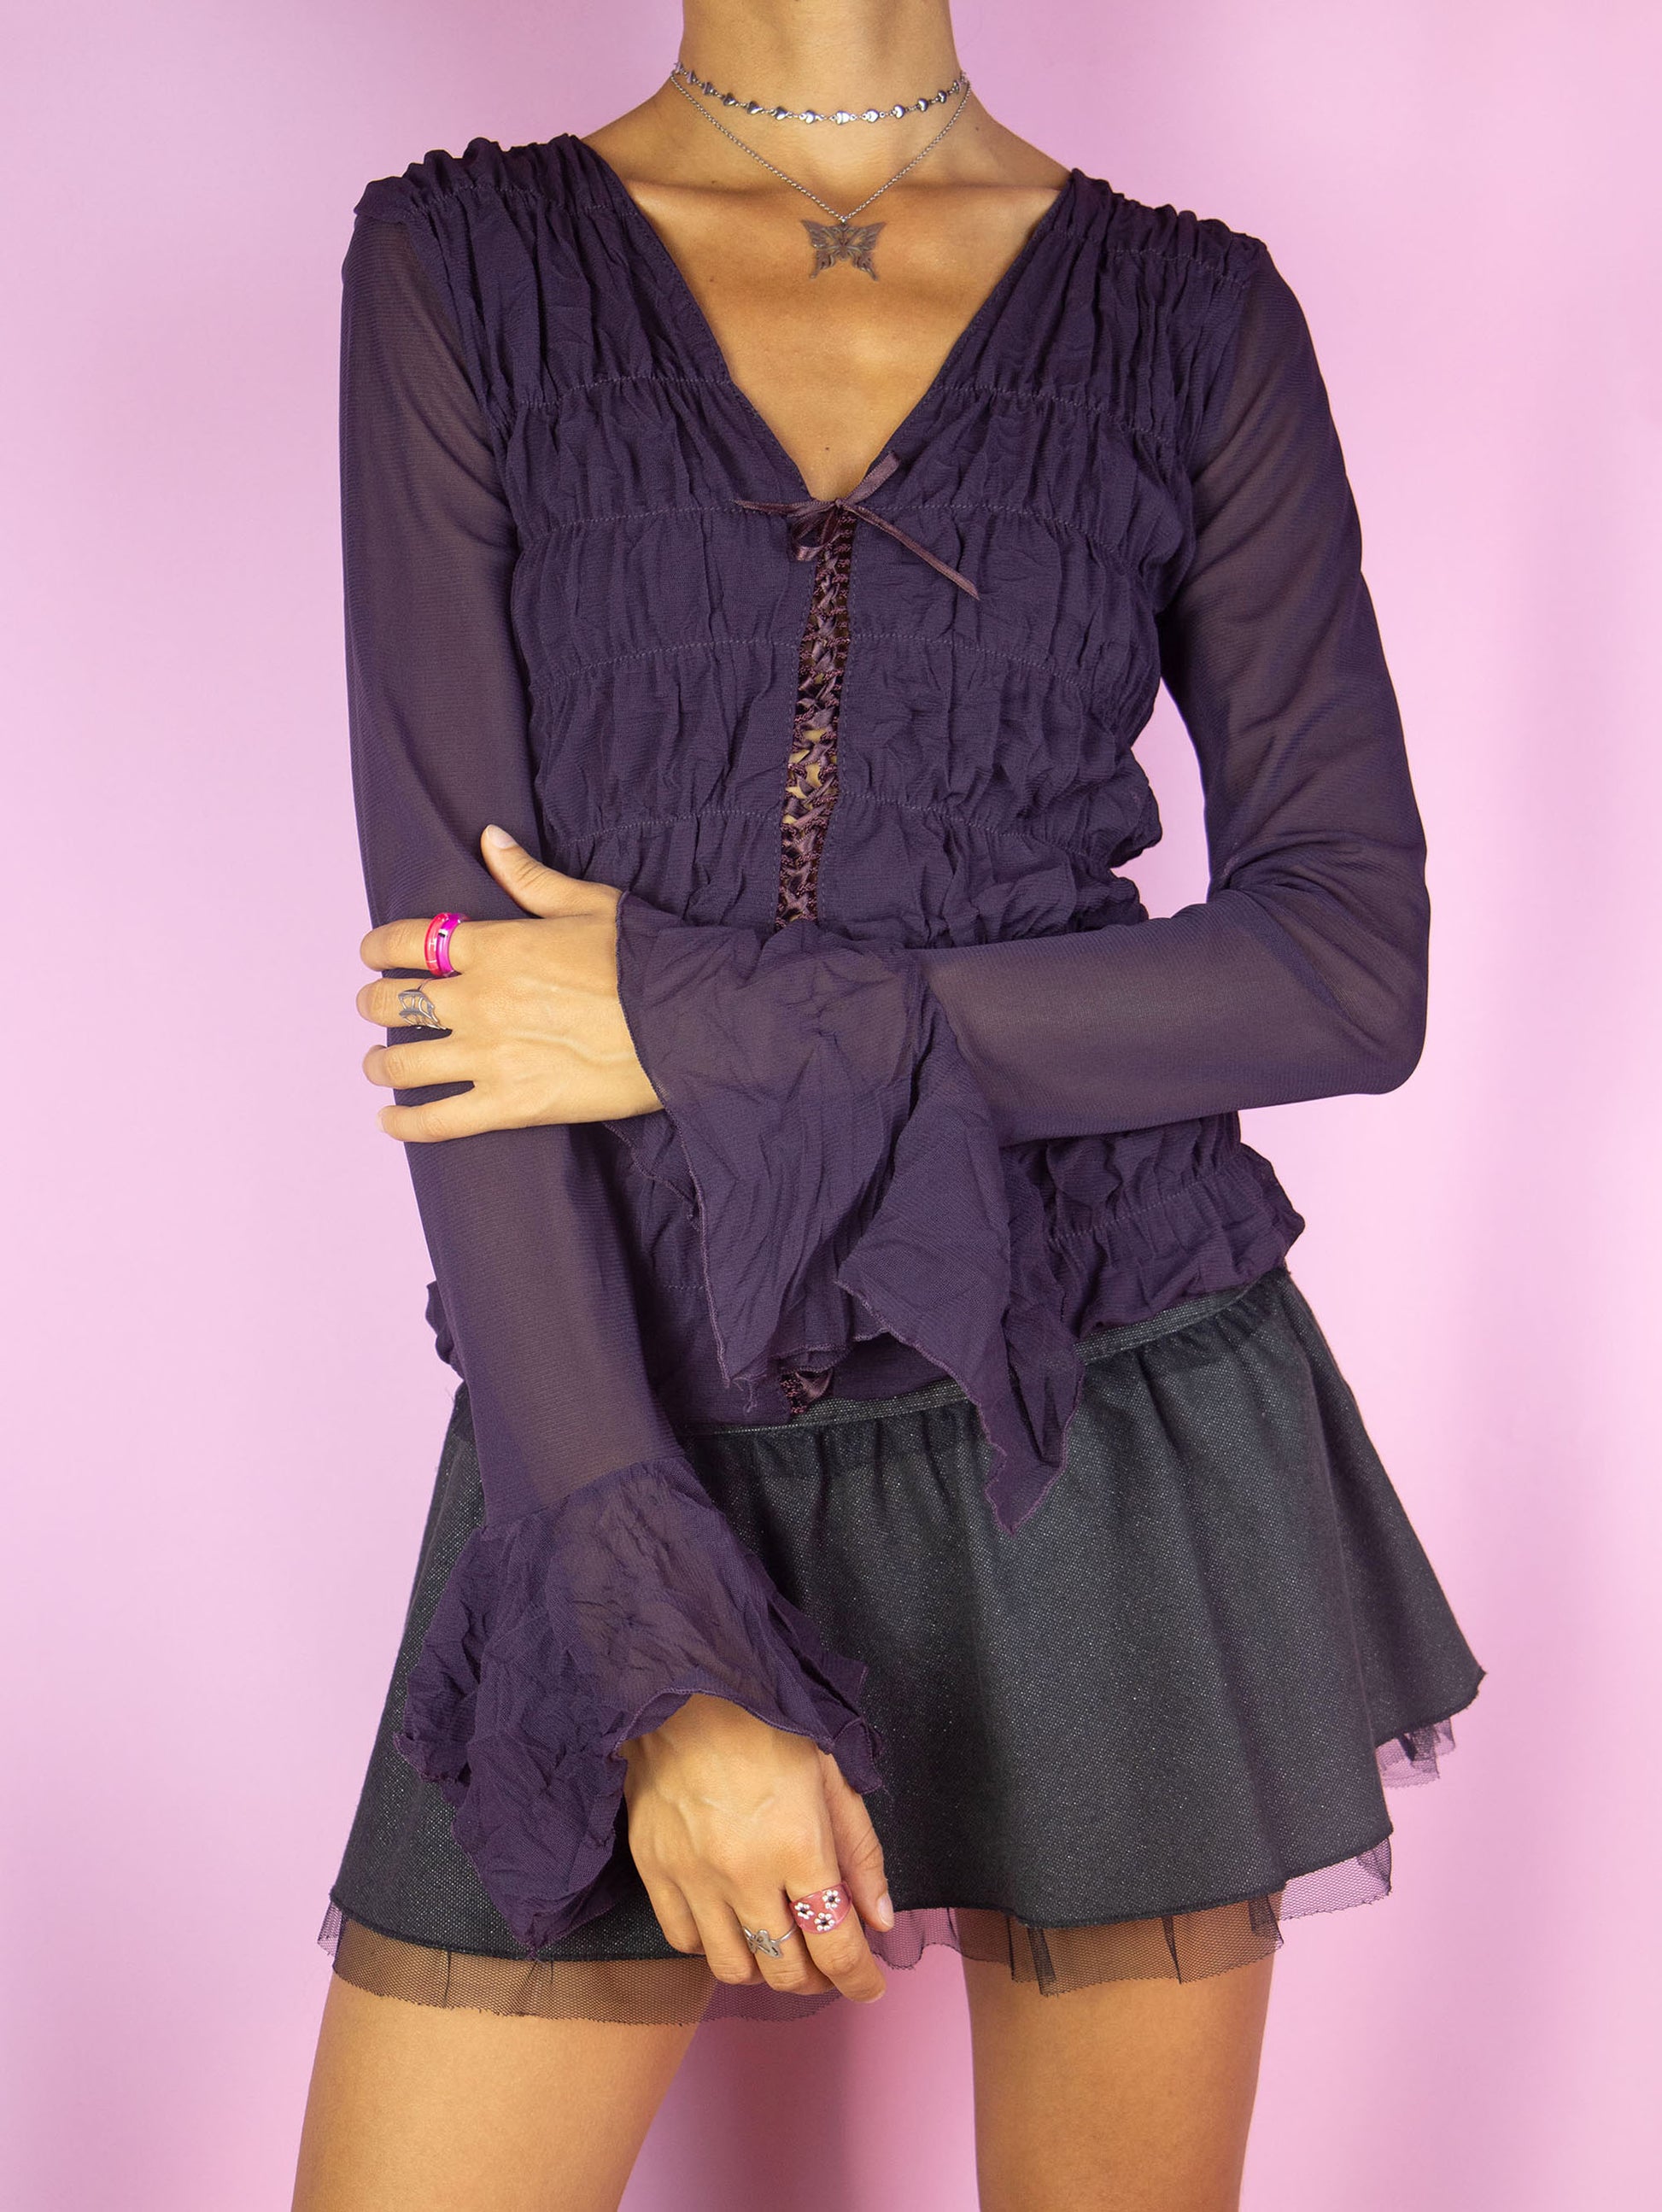 The Y2K Dark Purple Mesh Blouse is a vintage long bell sleeve ruched semi-sheer mesh dark purple top with lace-up front. Romantic fairy grunge whimsygoth 2000s shirt.